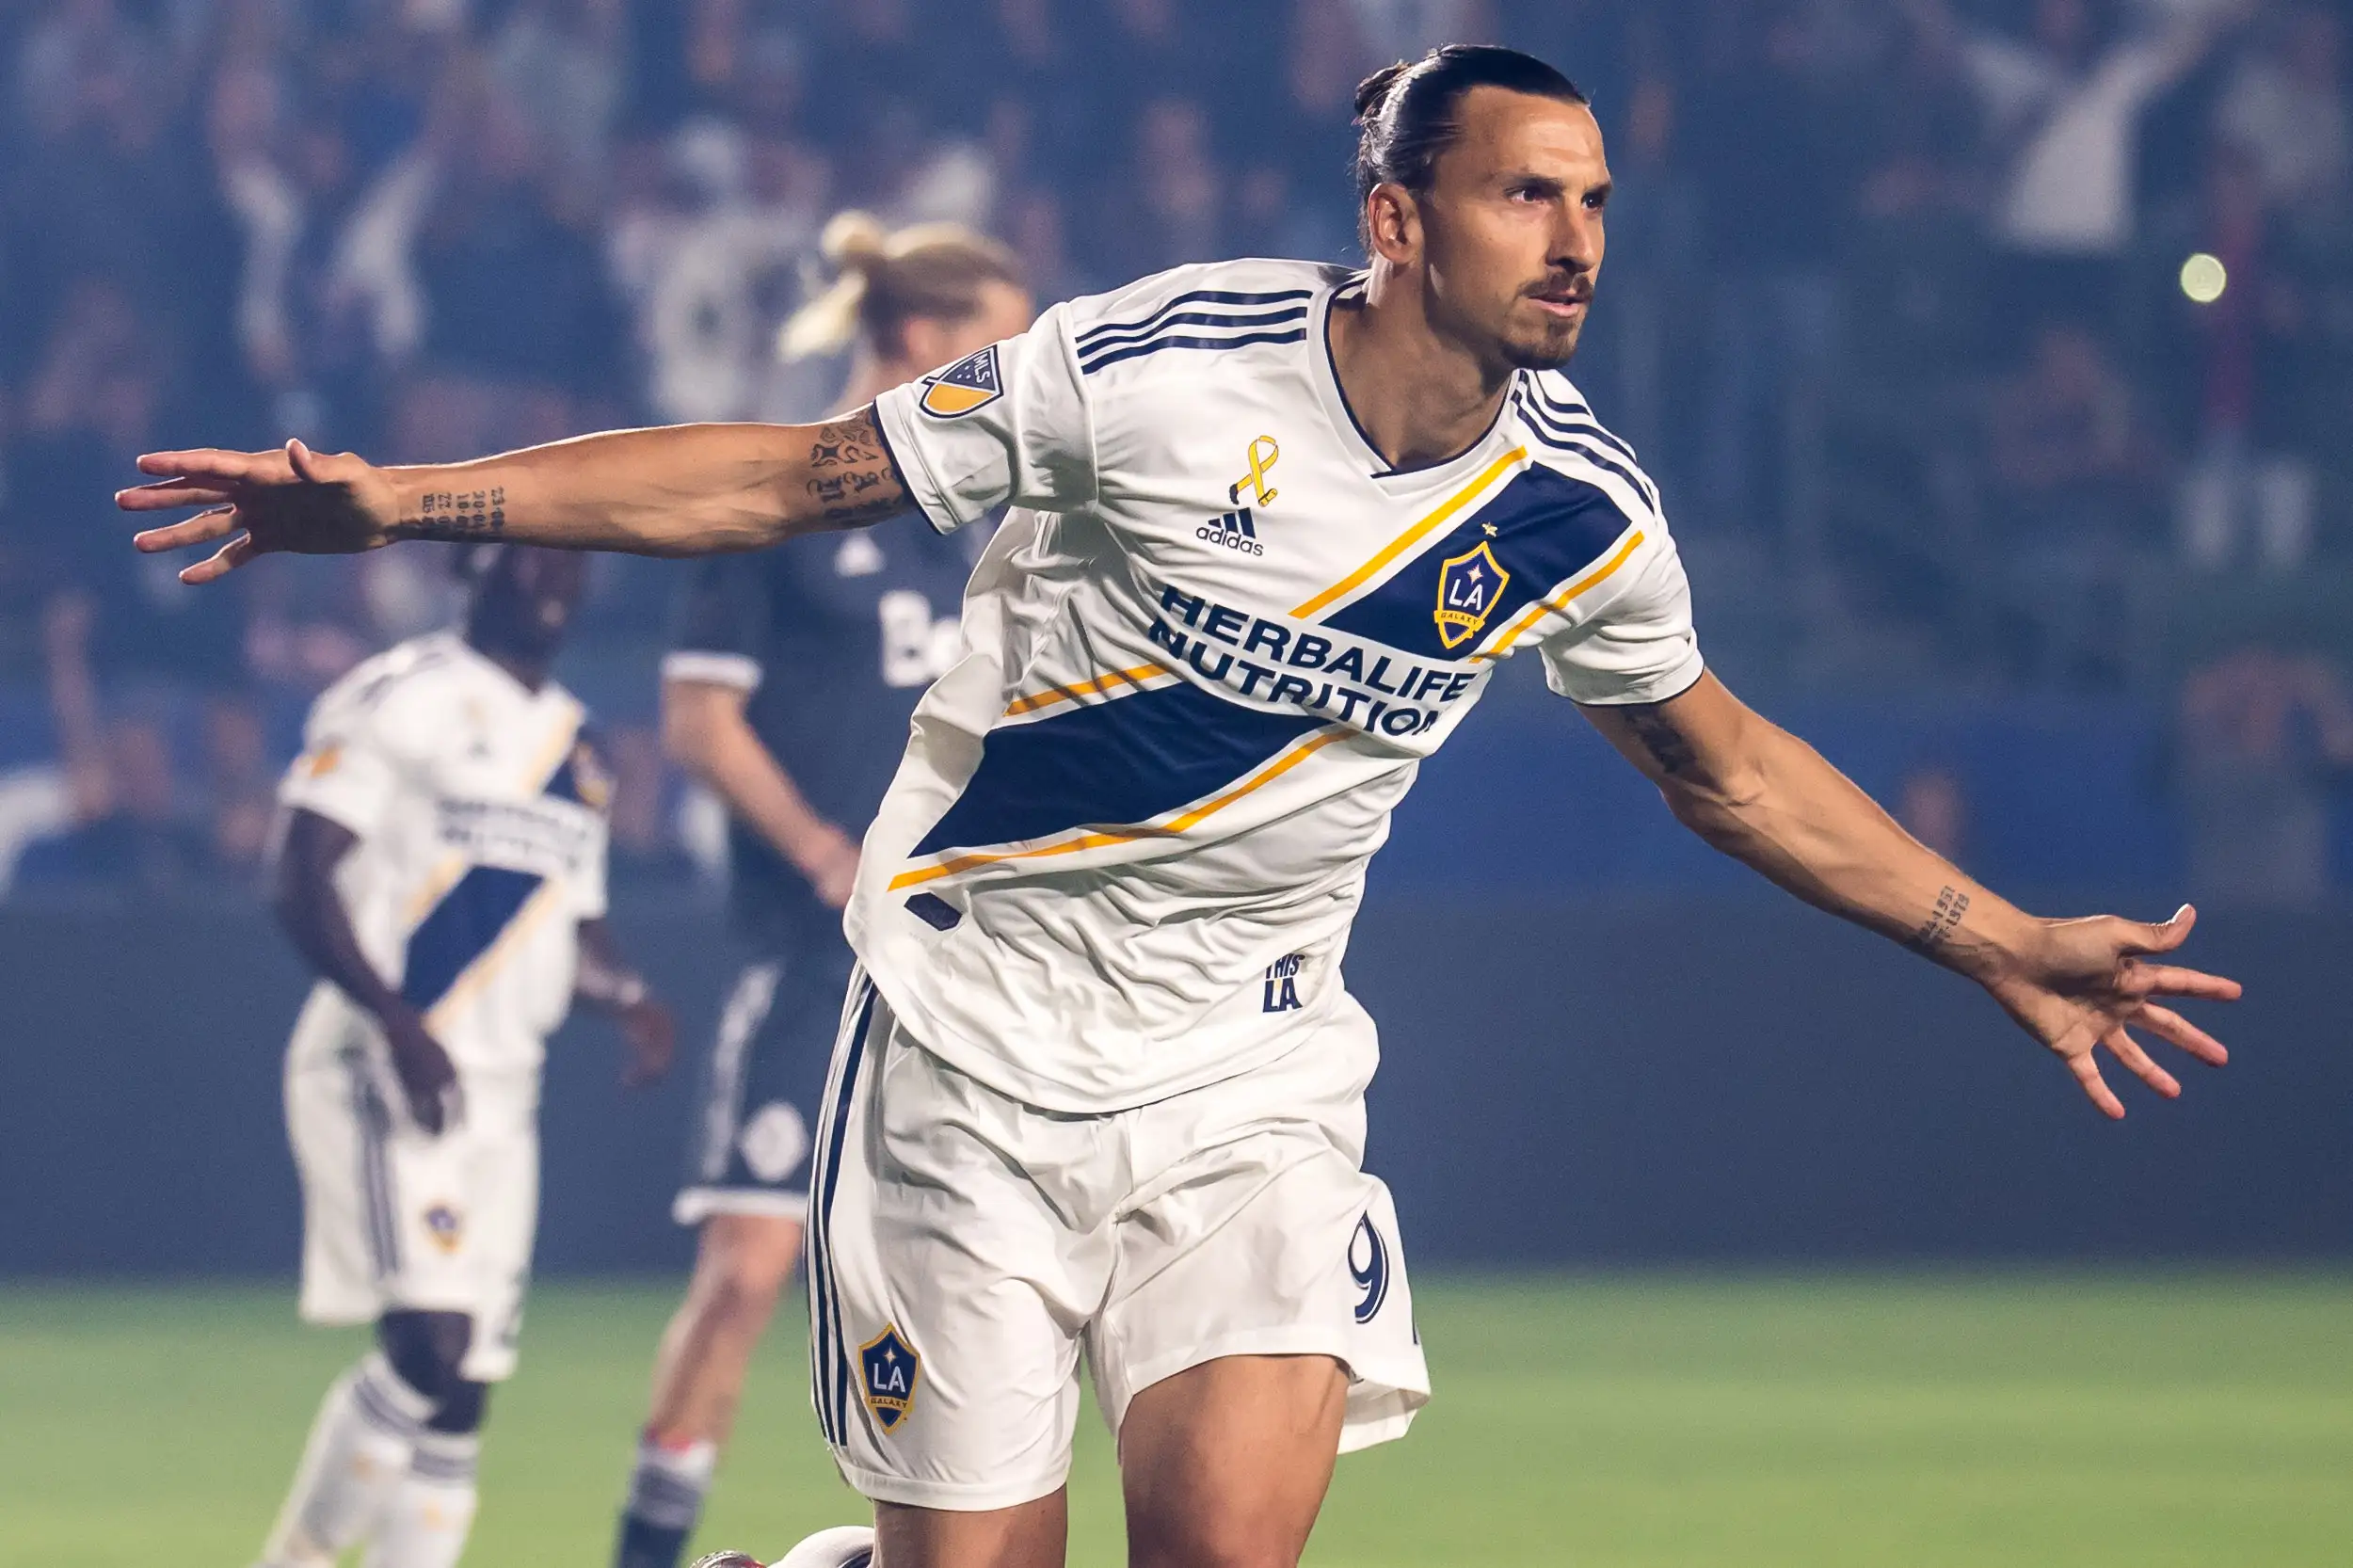 Zlatan Ibrahimovic #9 of Los Angeles Galaxy celebrates his penalty kick goal during the Los Angeles Galaxy's MLS match against Vancouver Whitecaps at the StubHub Center on September 29, 2018 in Carson, California. The Los Angeles Galaxy won the match 3-0.